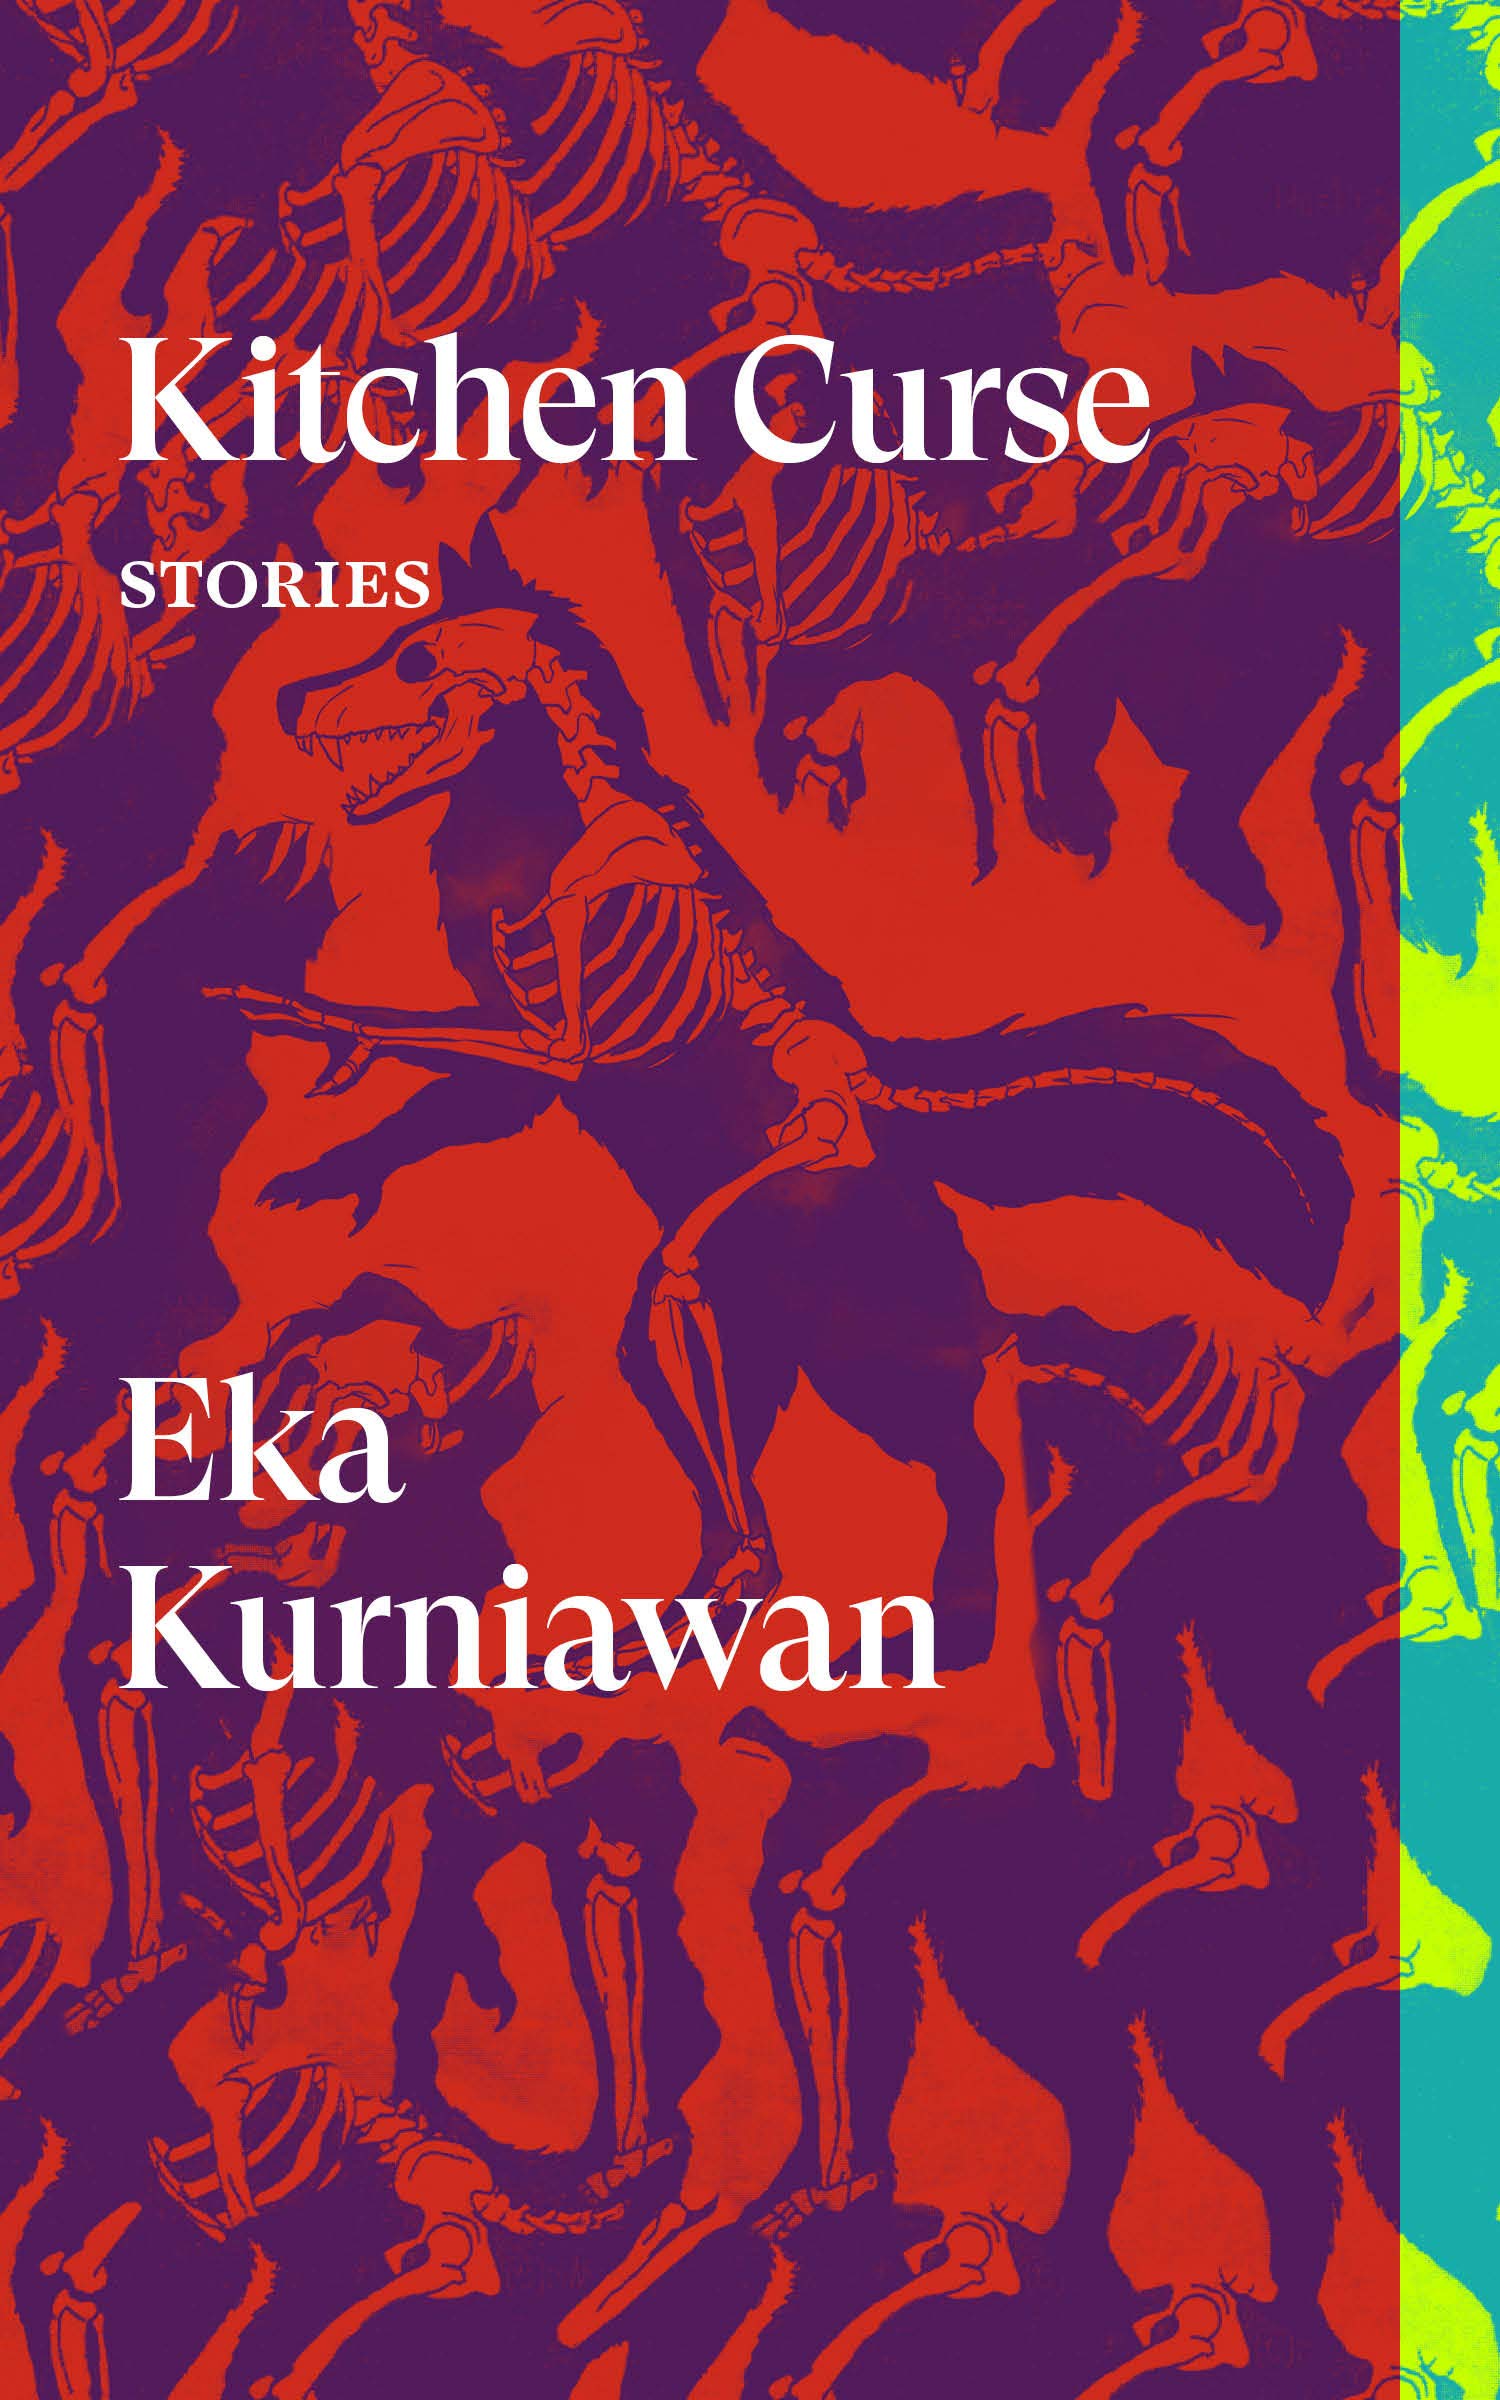 Colorful book cover featuring the title "kitchen curse: stories" by eka kurniawan with an abstract and vibrant pattern in the background.